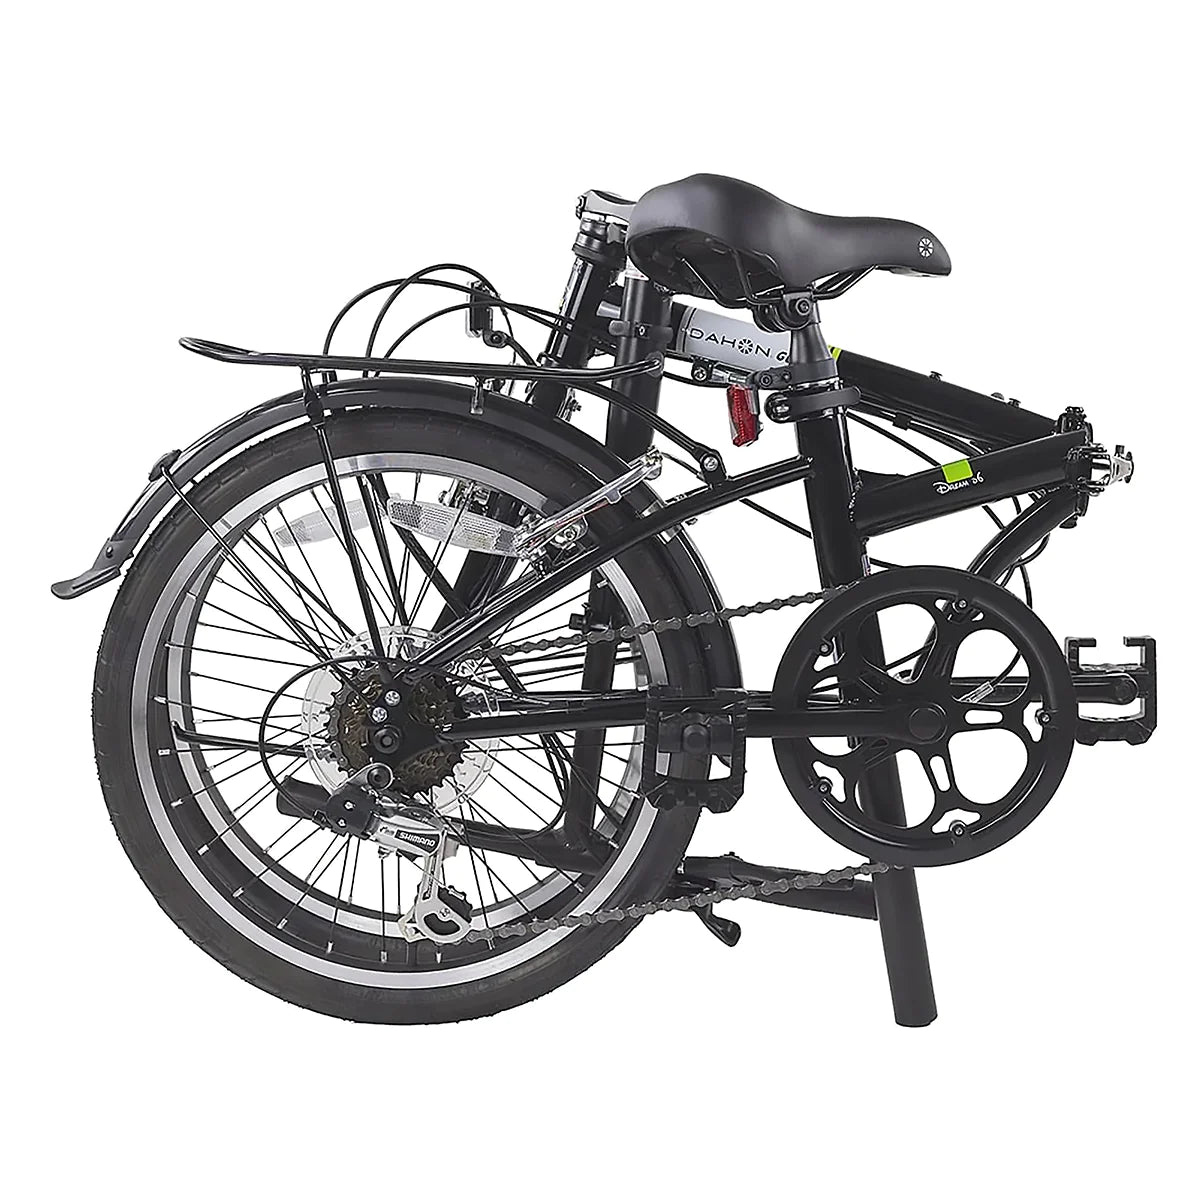 DAHON Dream D6 Deltech Cable System Weight Limit to 300lbs 